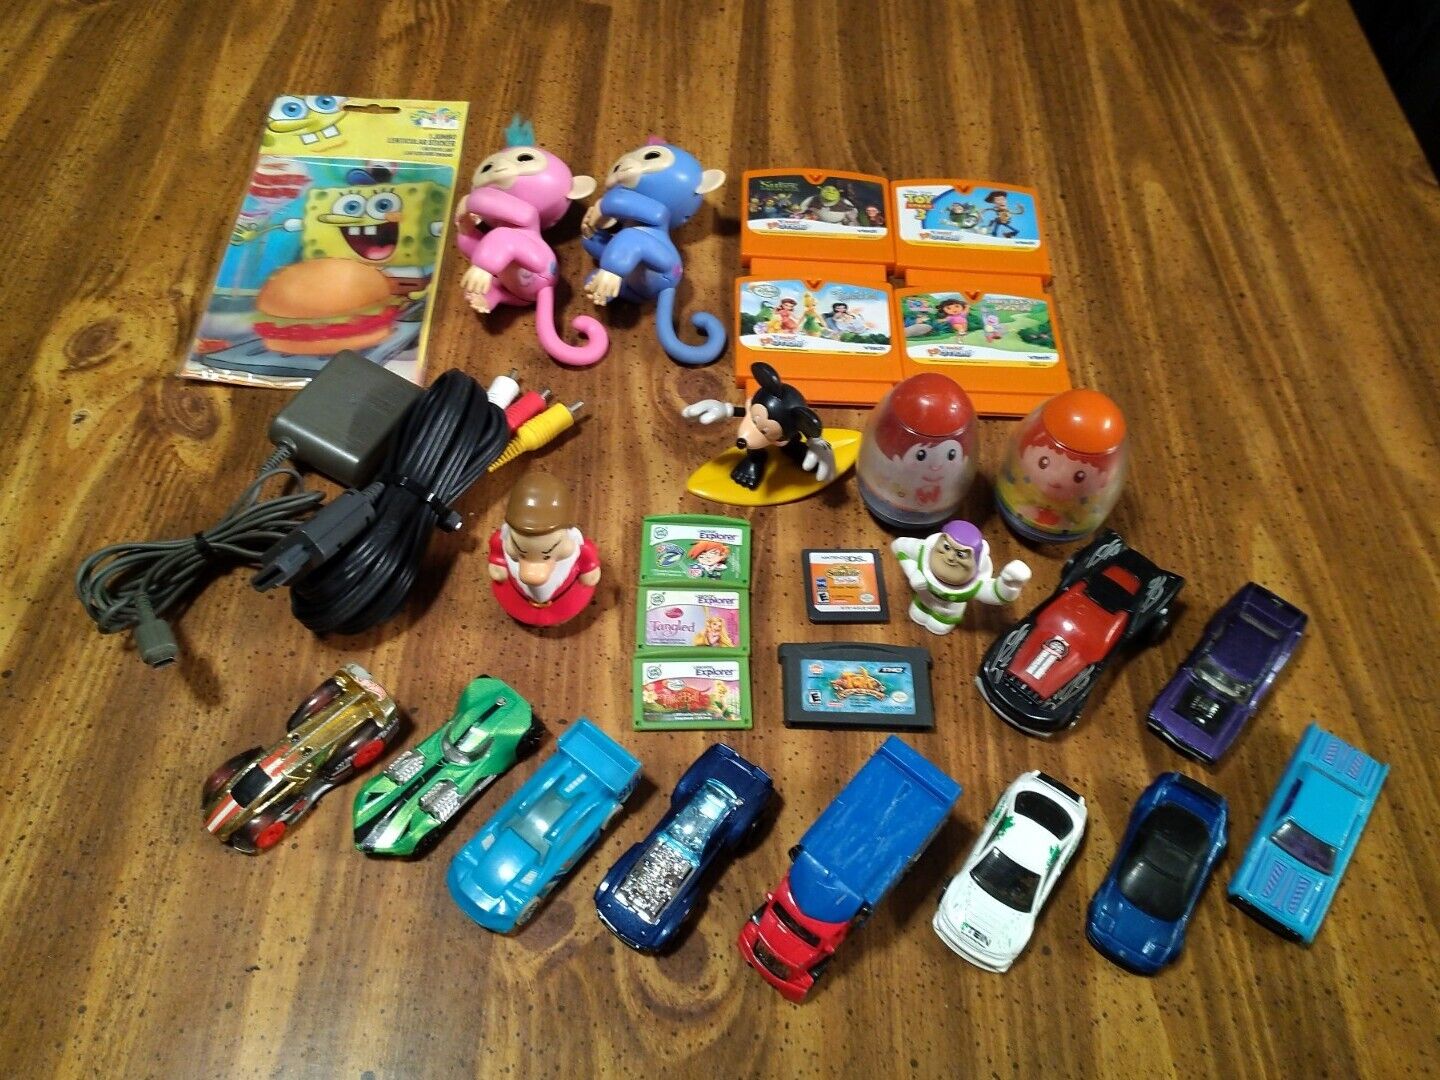 Junk Drawer Lot Collectibles, Toys, VTech & Leapfrog Games, Hot Wheels & More